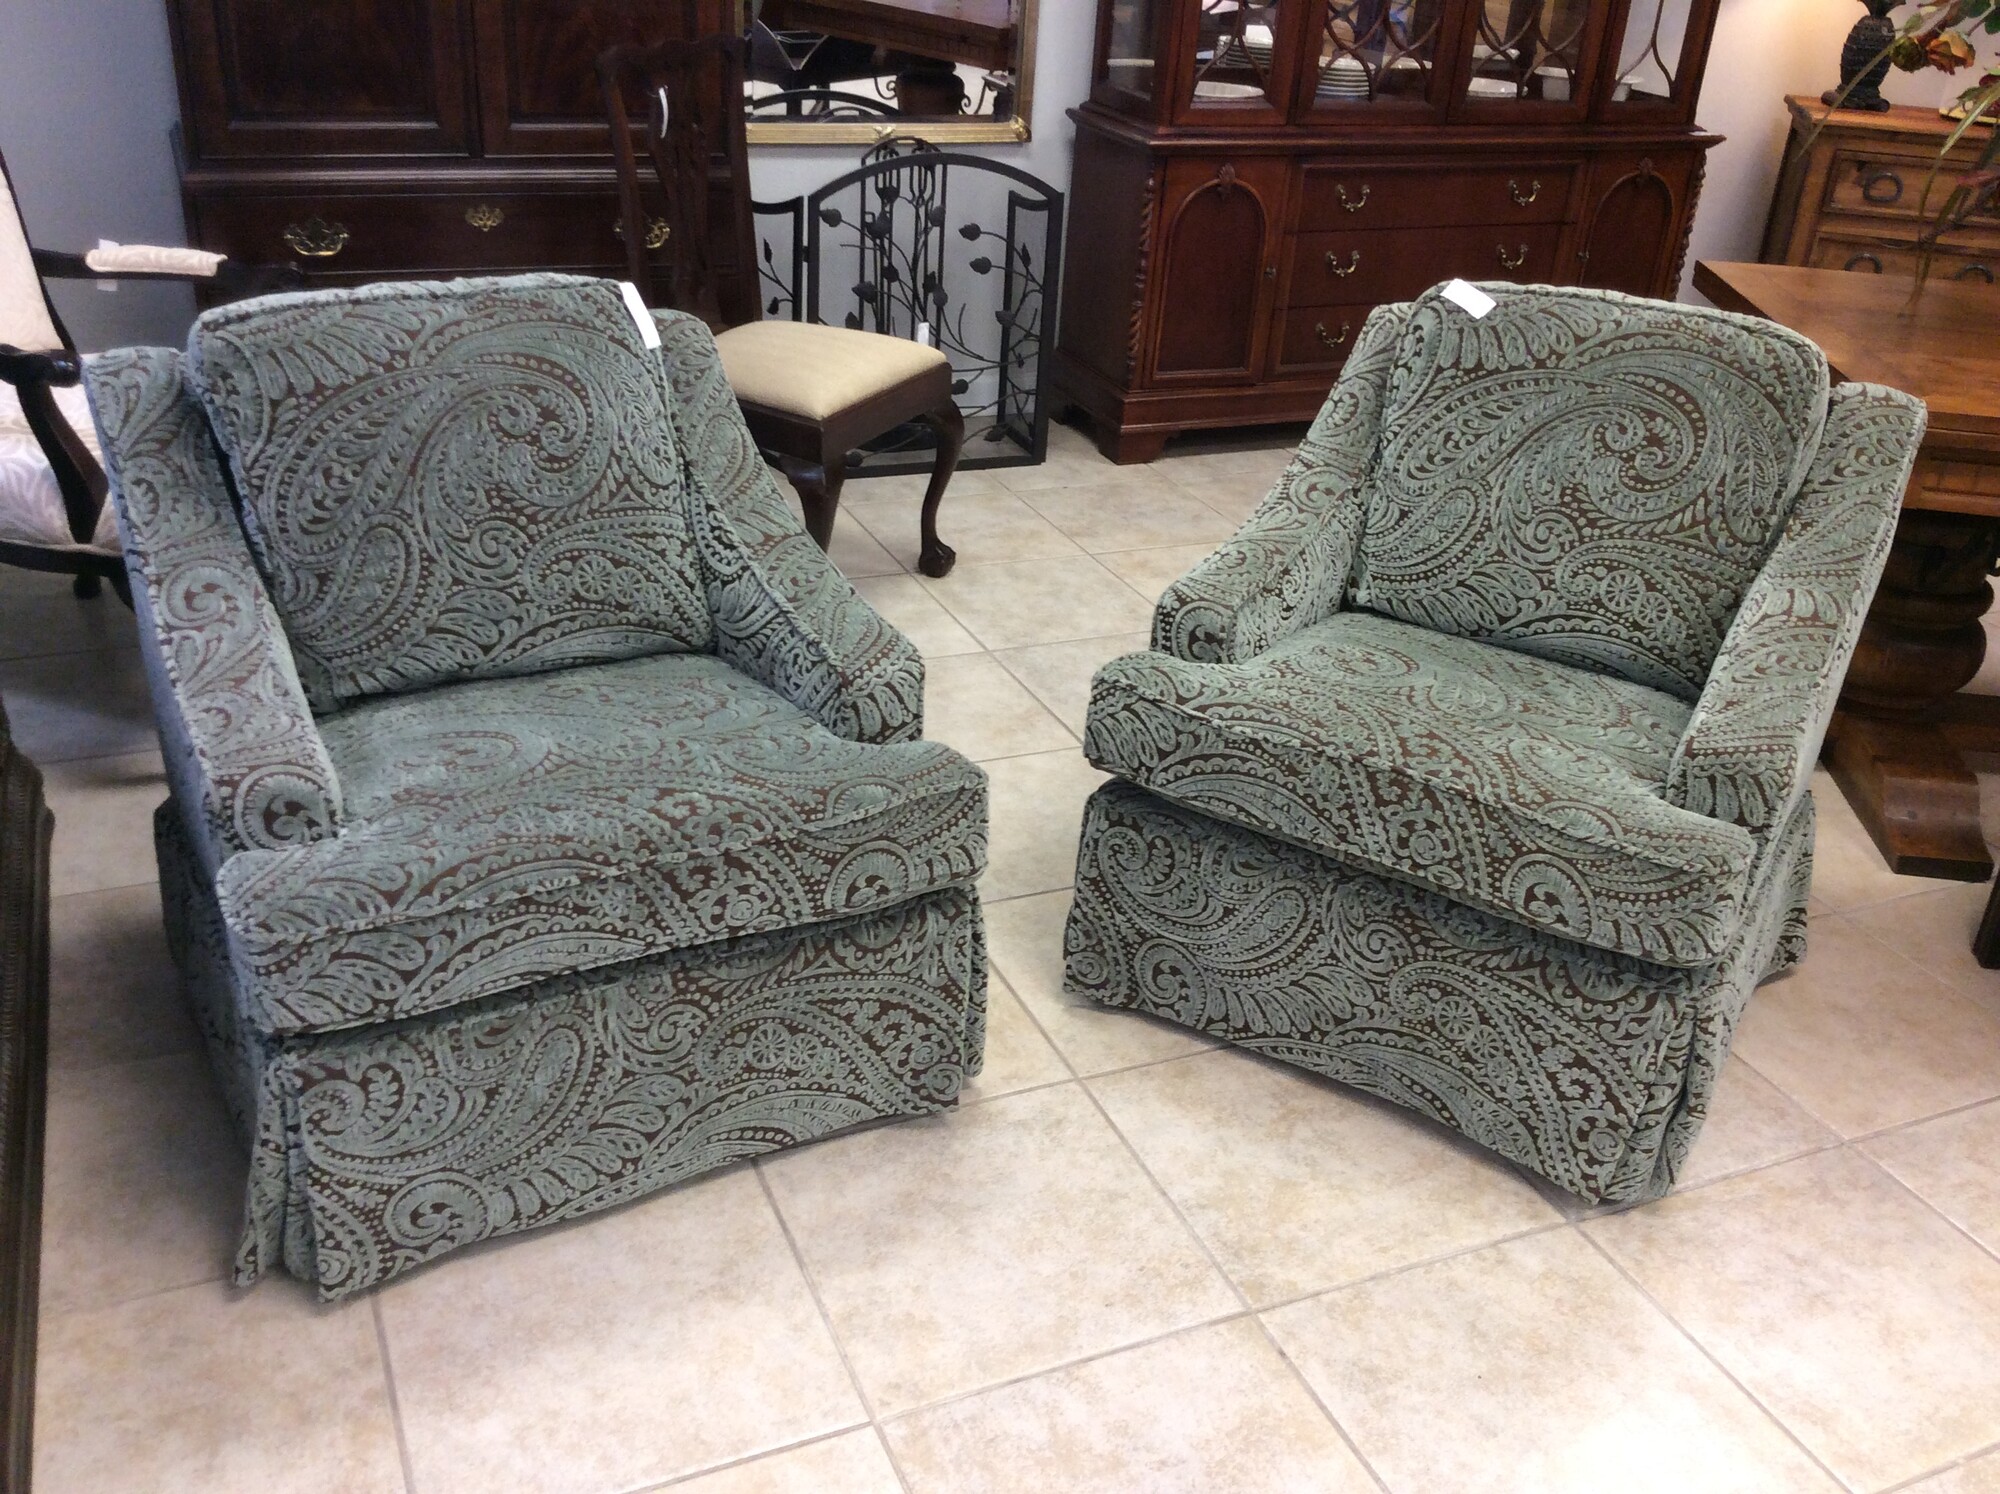 This is a pair of beautiful aqua and brown paisly swivel chairs.